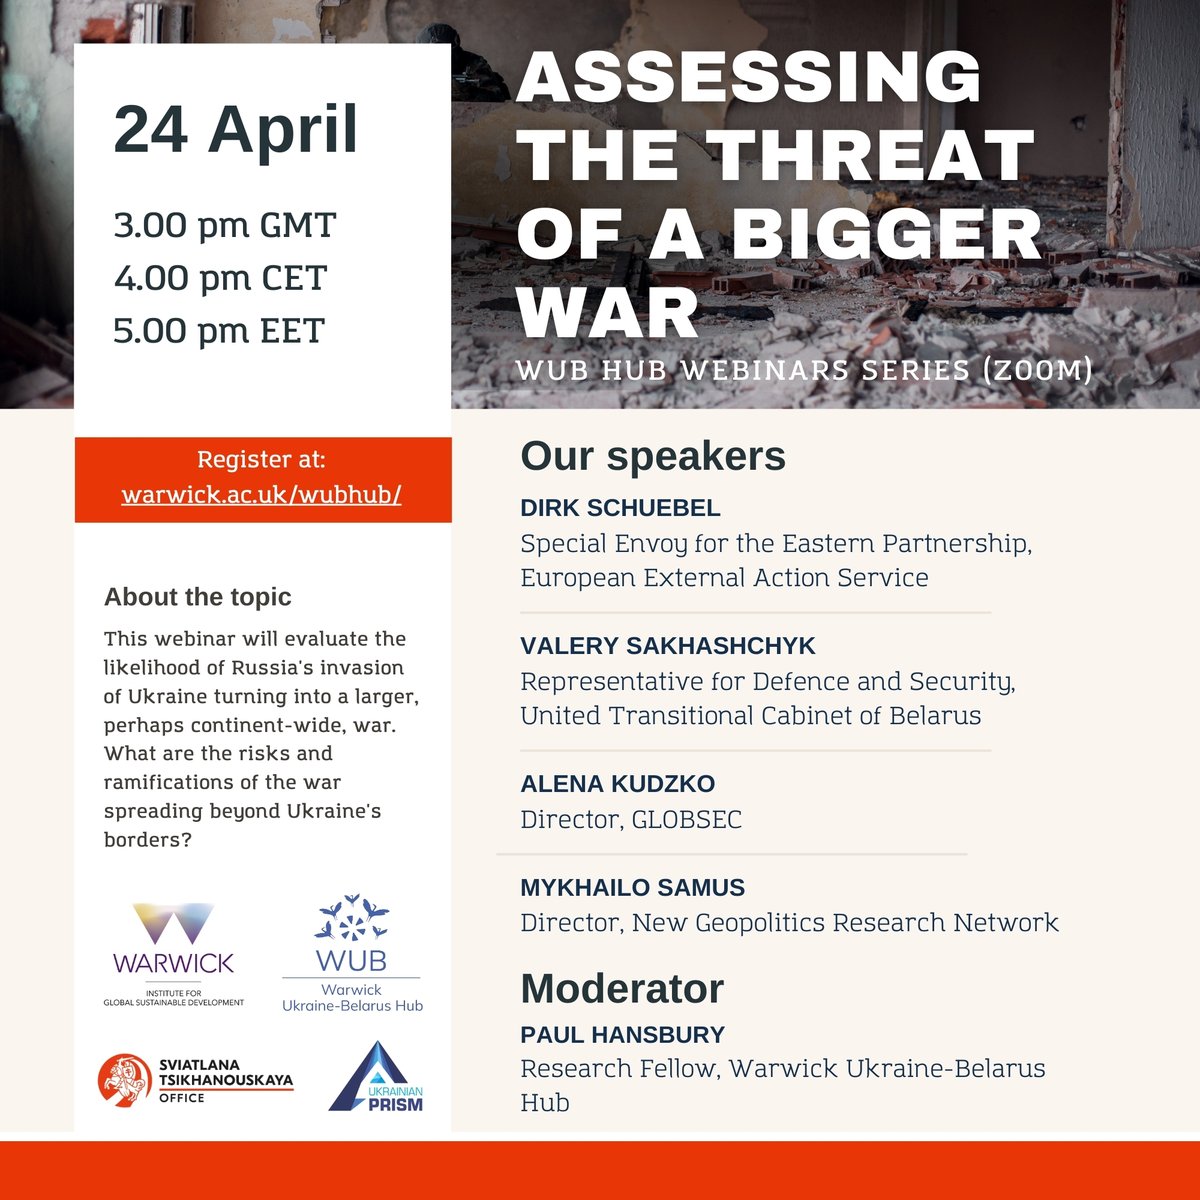 All are welcome to join our #WUBhub webinar next week “Assessing the risks of a bigger war” (with @IGSD_UoW @EAKorosteleva) Registration link here: warwick.ac.uk/fac/arts/schoo…